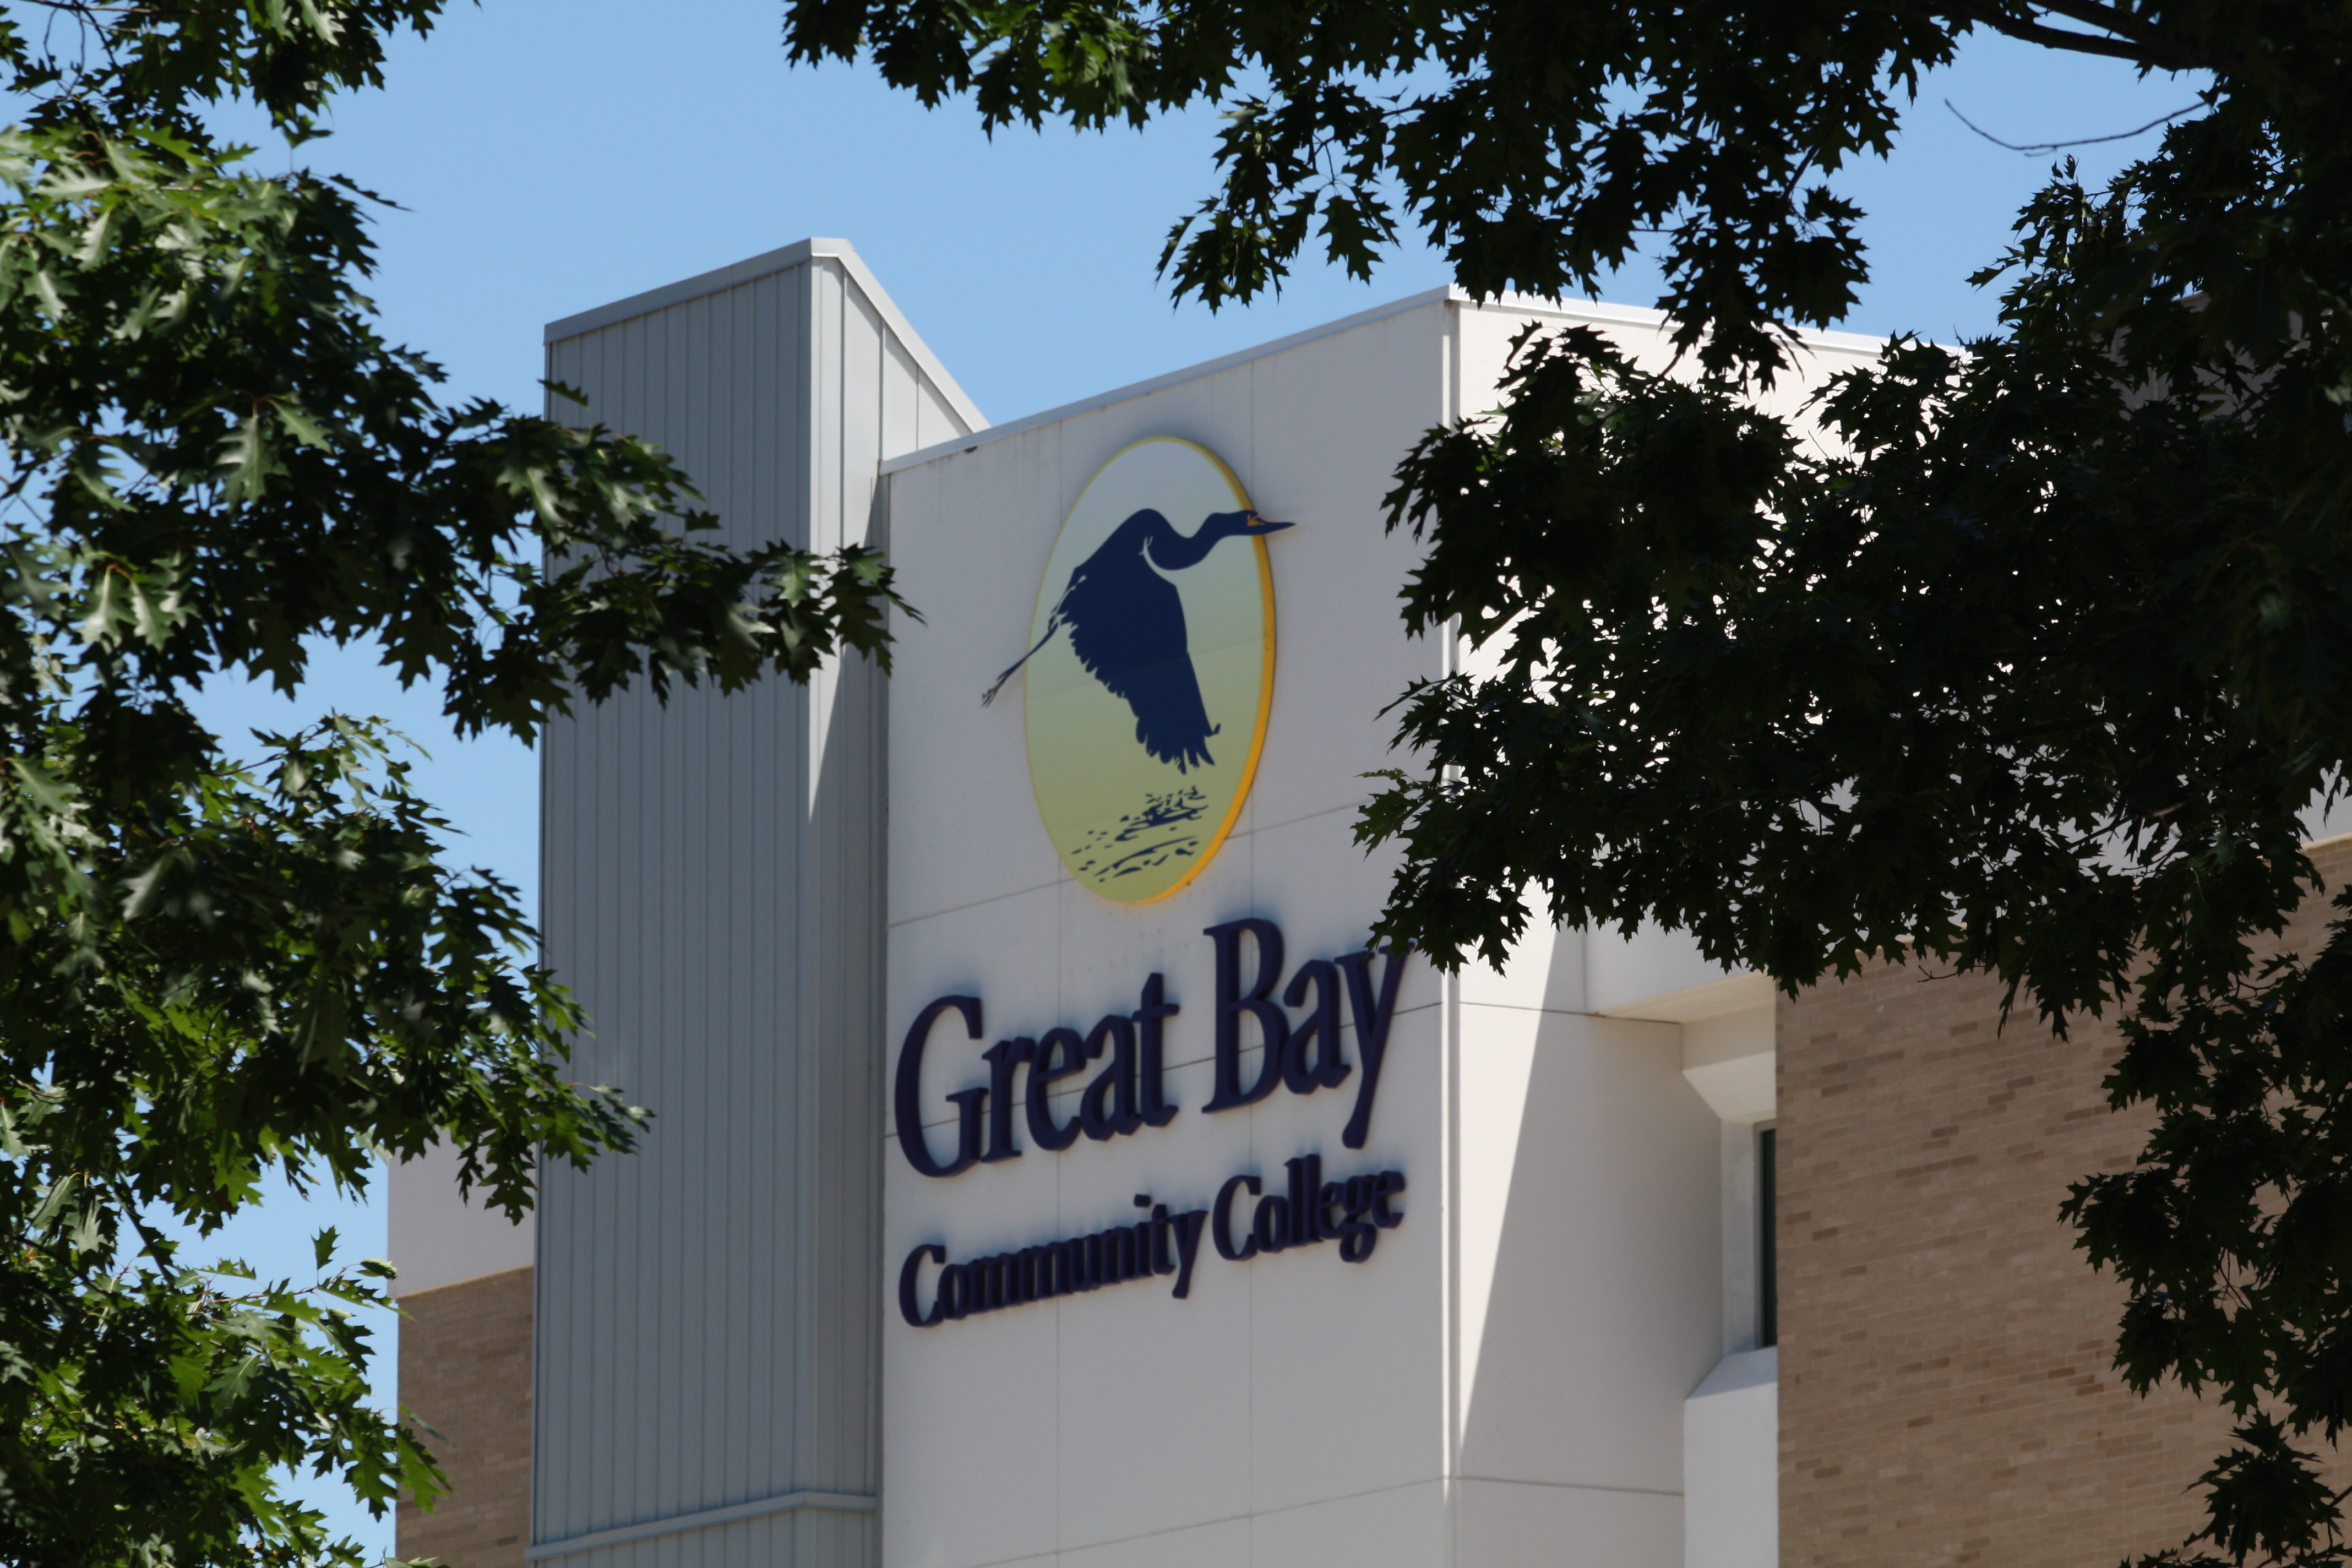 Upright Education and Great Bay Community College Partner to Provide Technology Bootcamps in Software Development, UX/UI, Tech Sales, and More